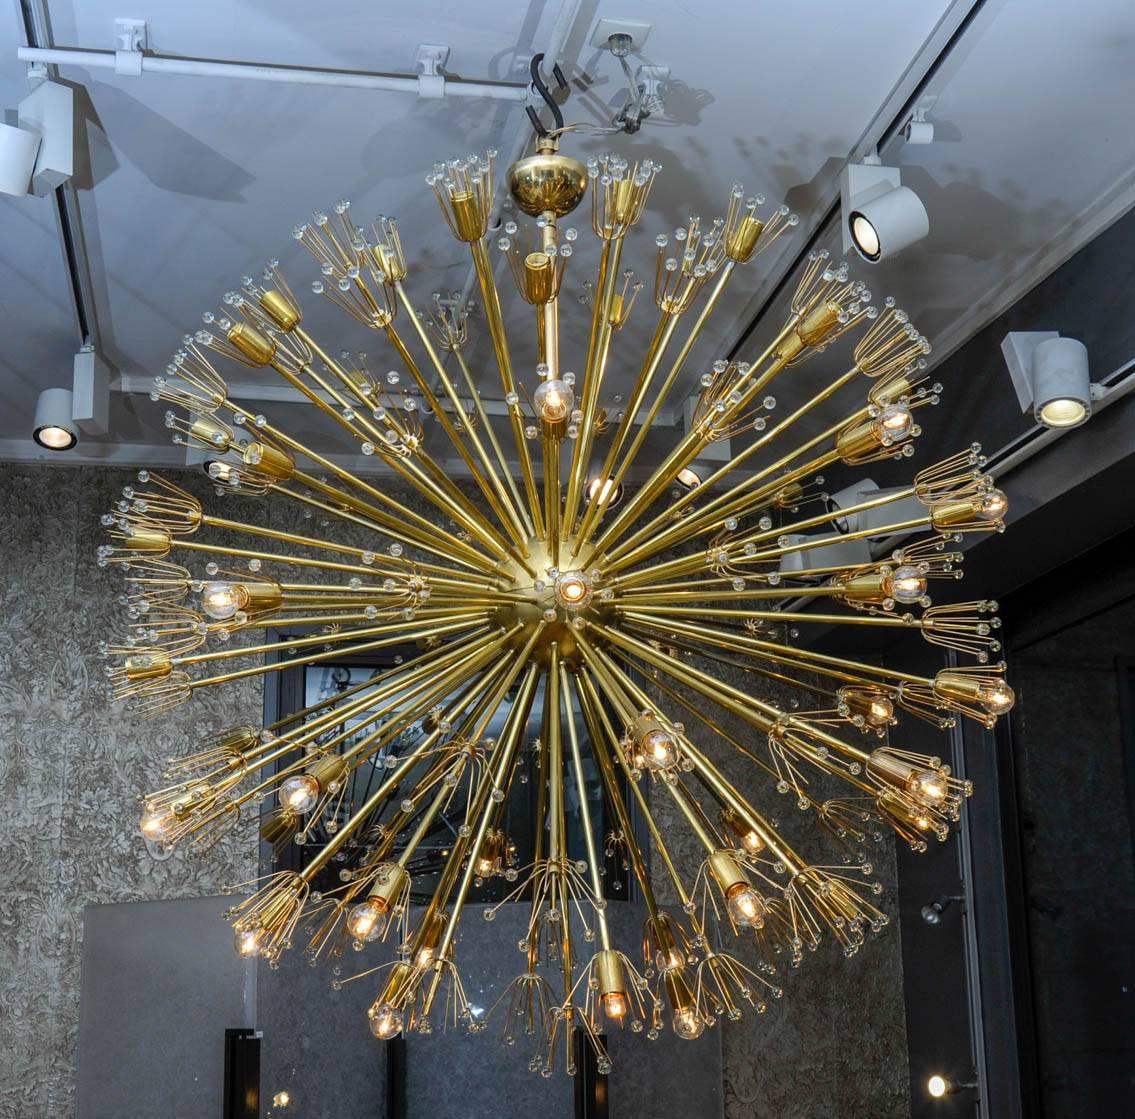 This large chandelier is an original creation by Studio Glustin. Picks are made of brass and Murano glass, 52 lights are composing it.